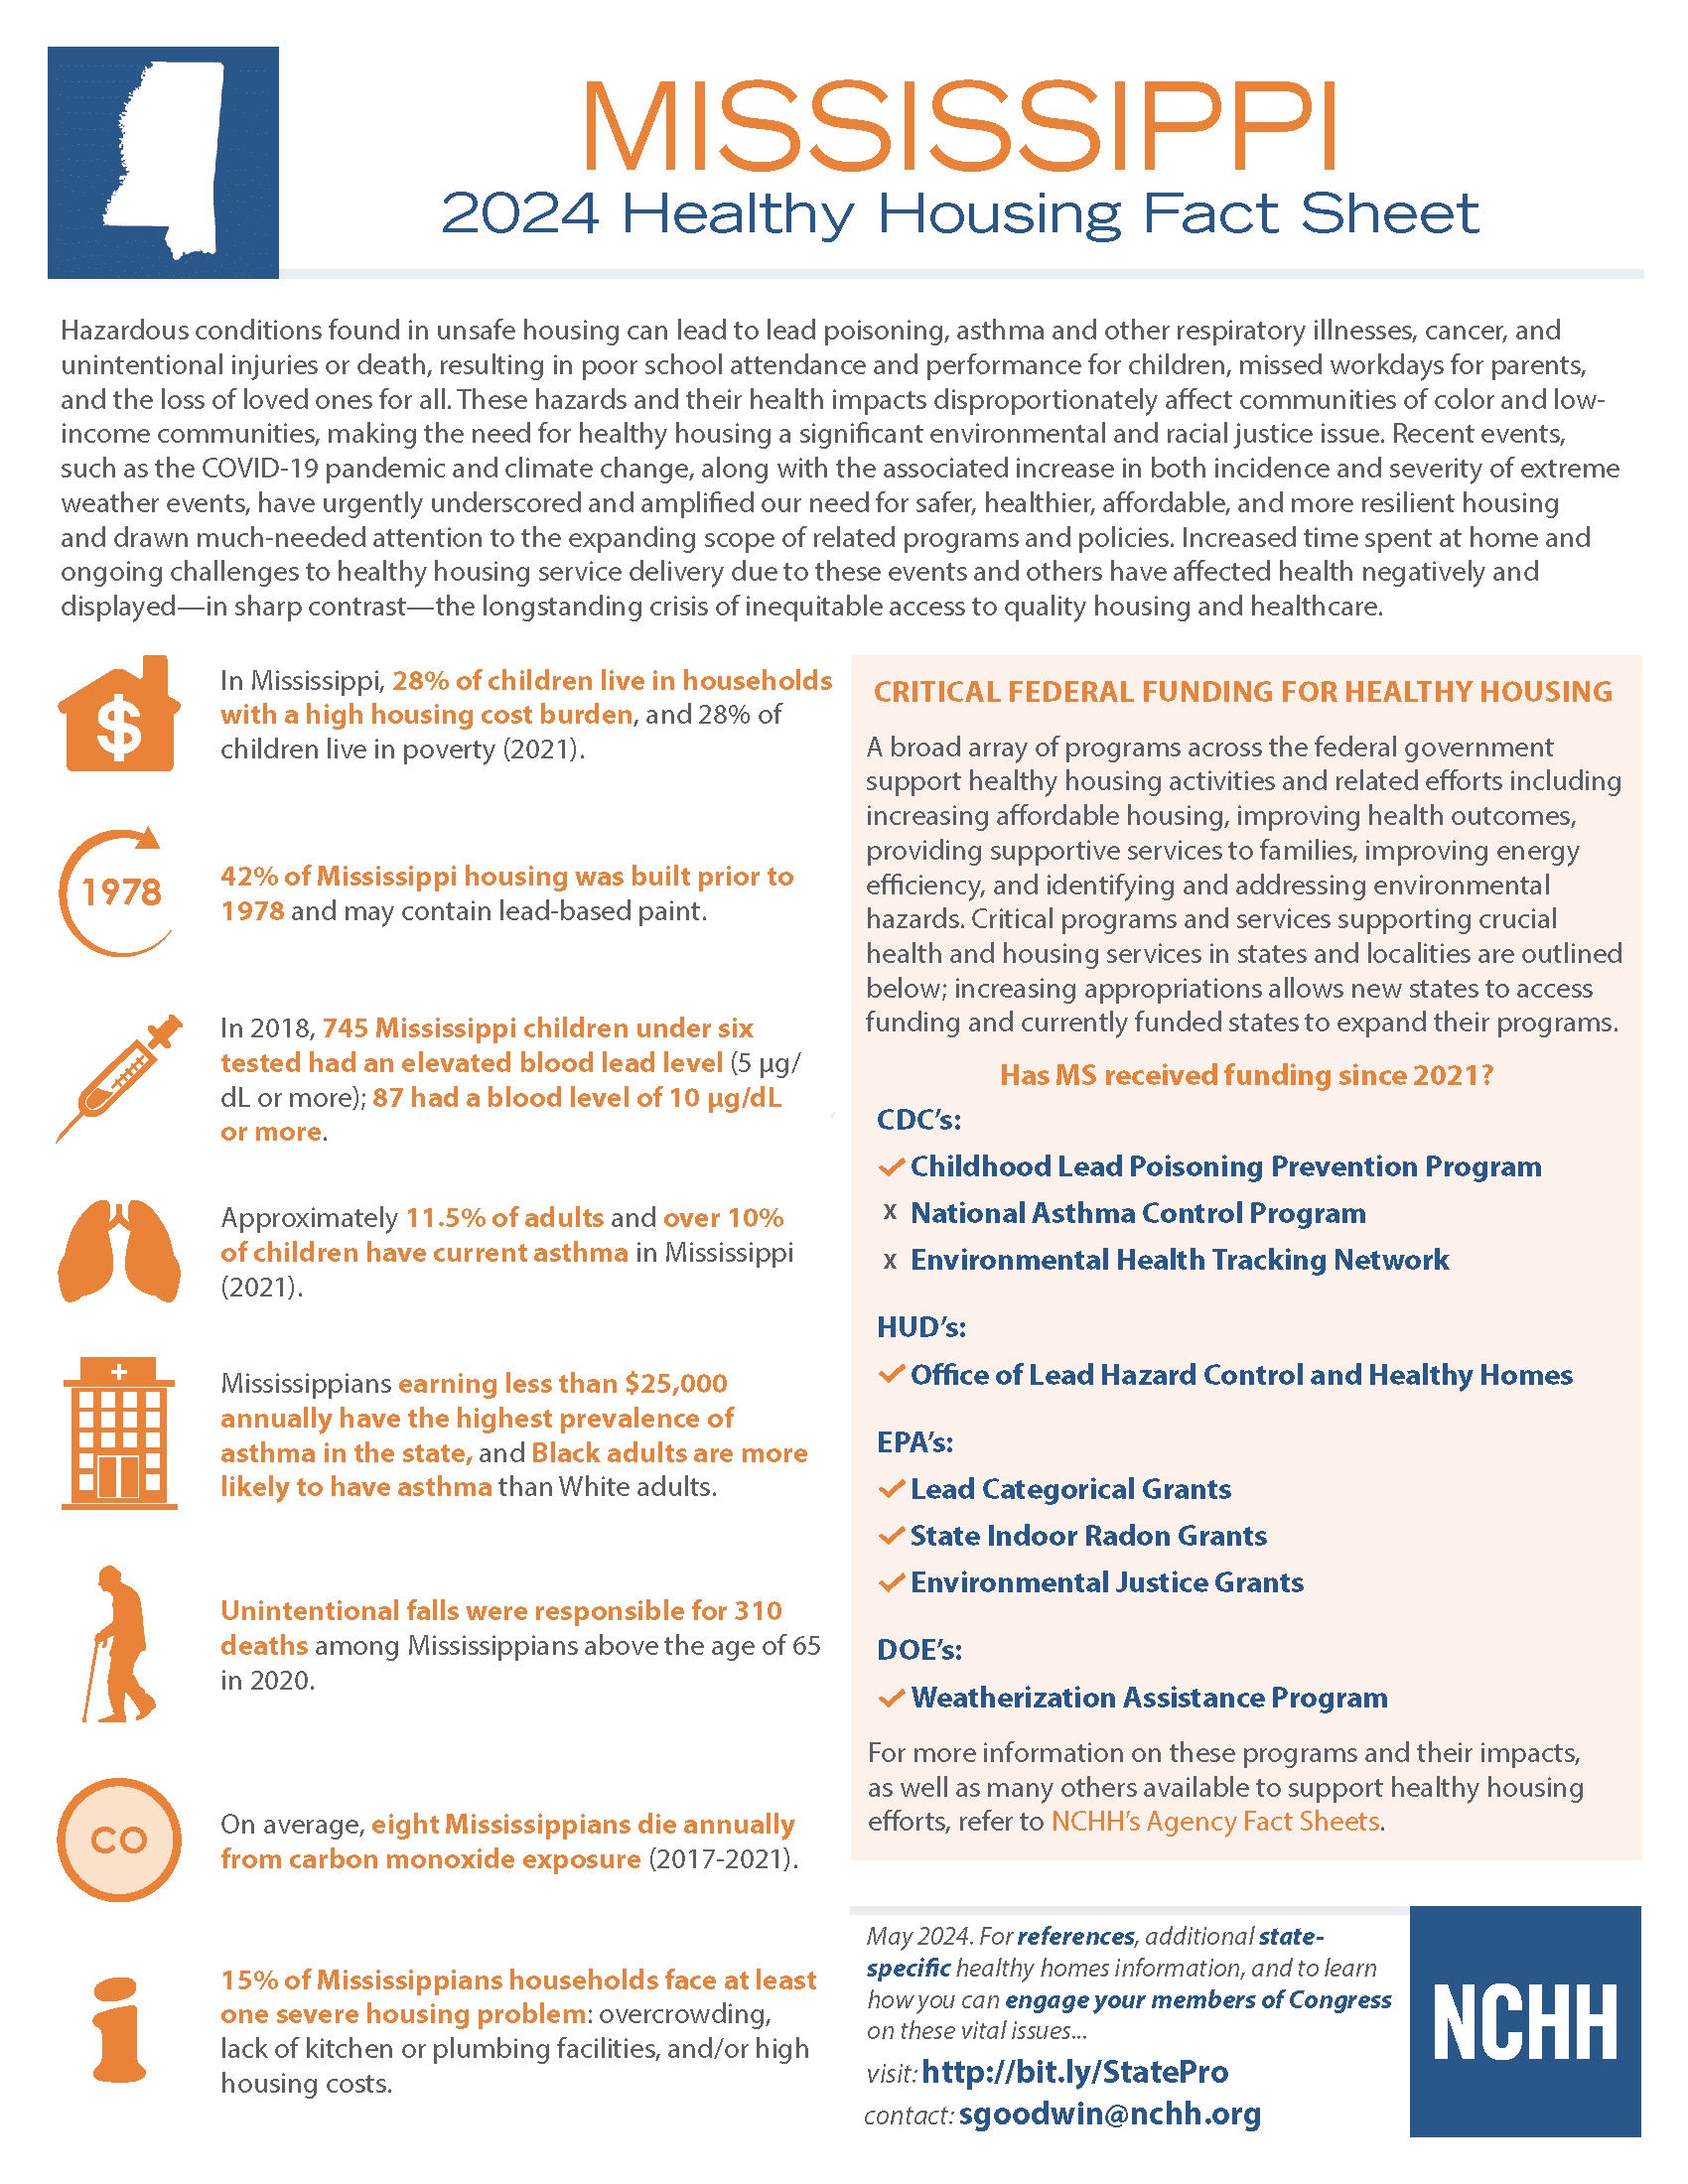 Fact sheet describing the overall environmental health of the state of Mississippi.